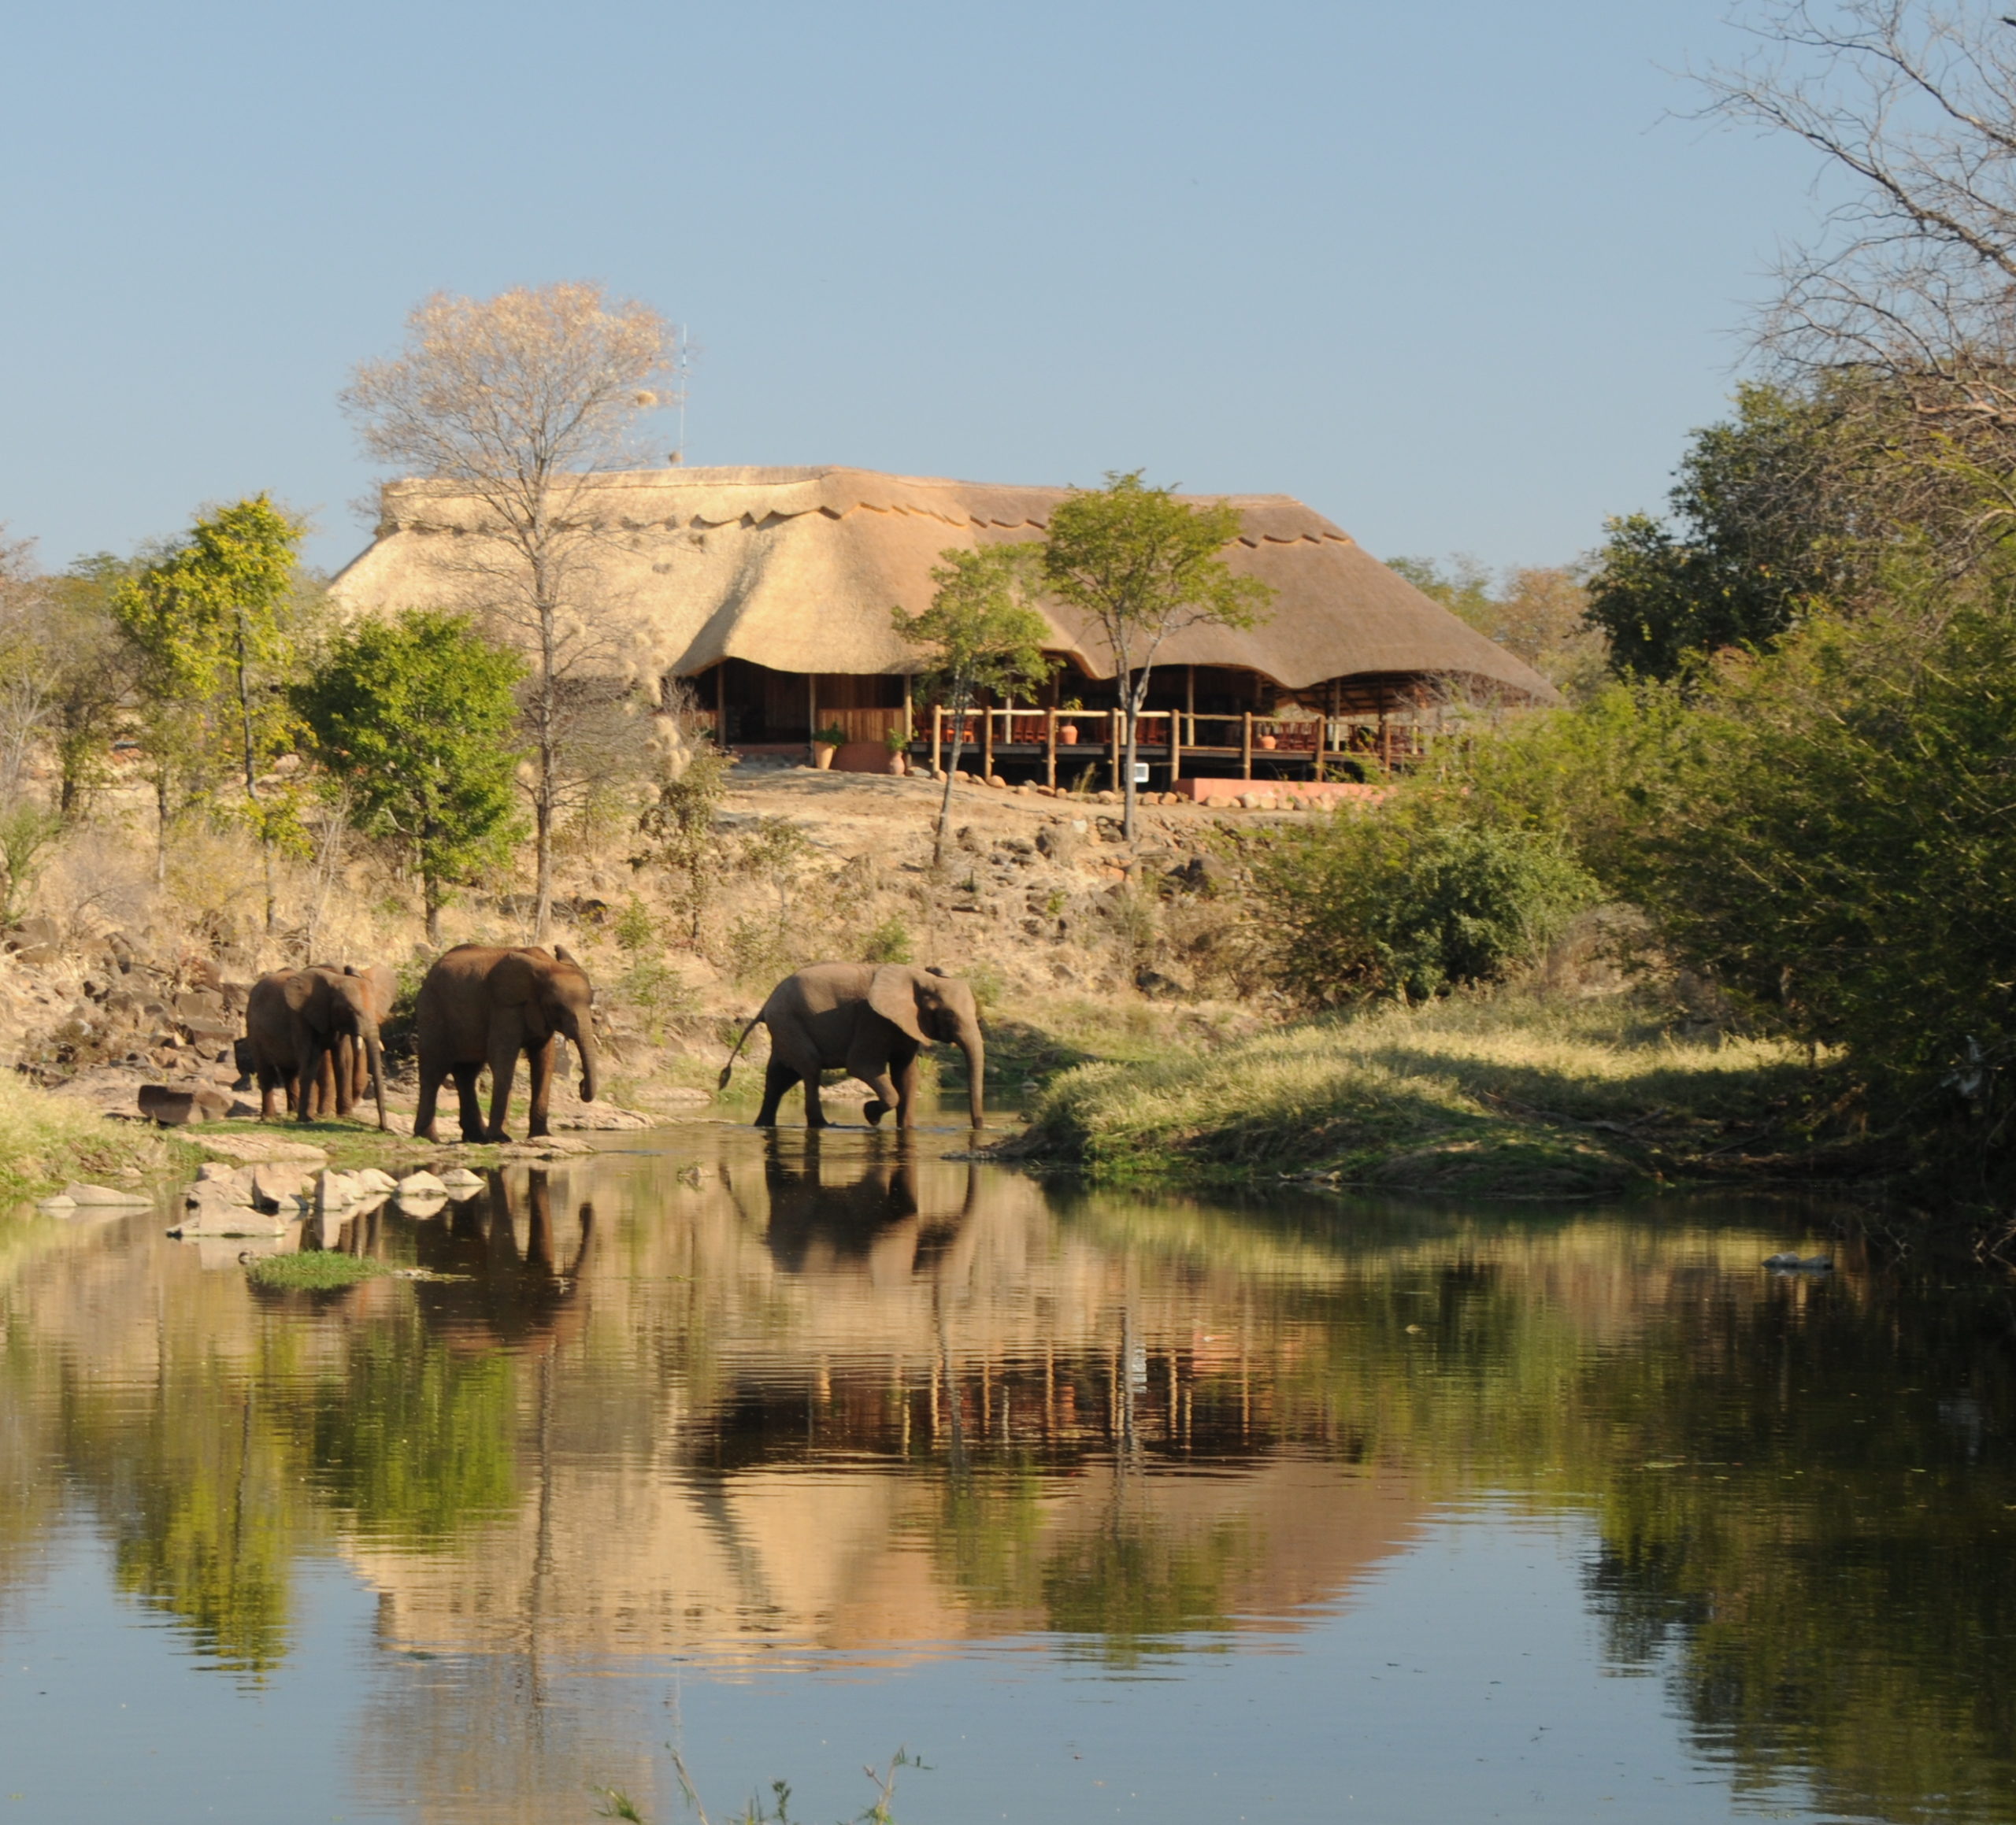 The Wallow Lodge Victoria Falls: A dream place for the tourist